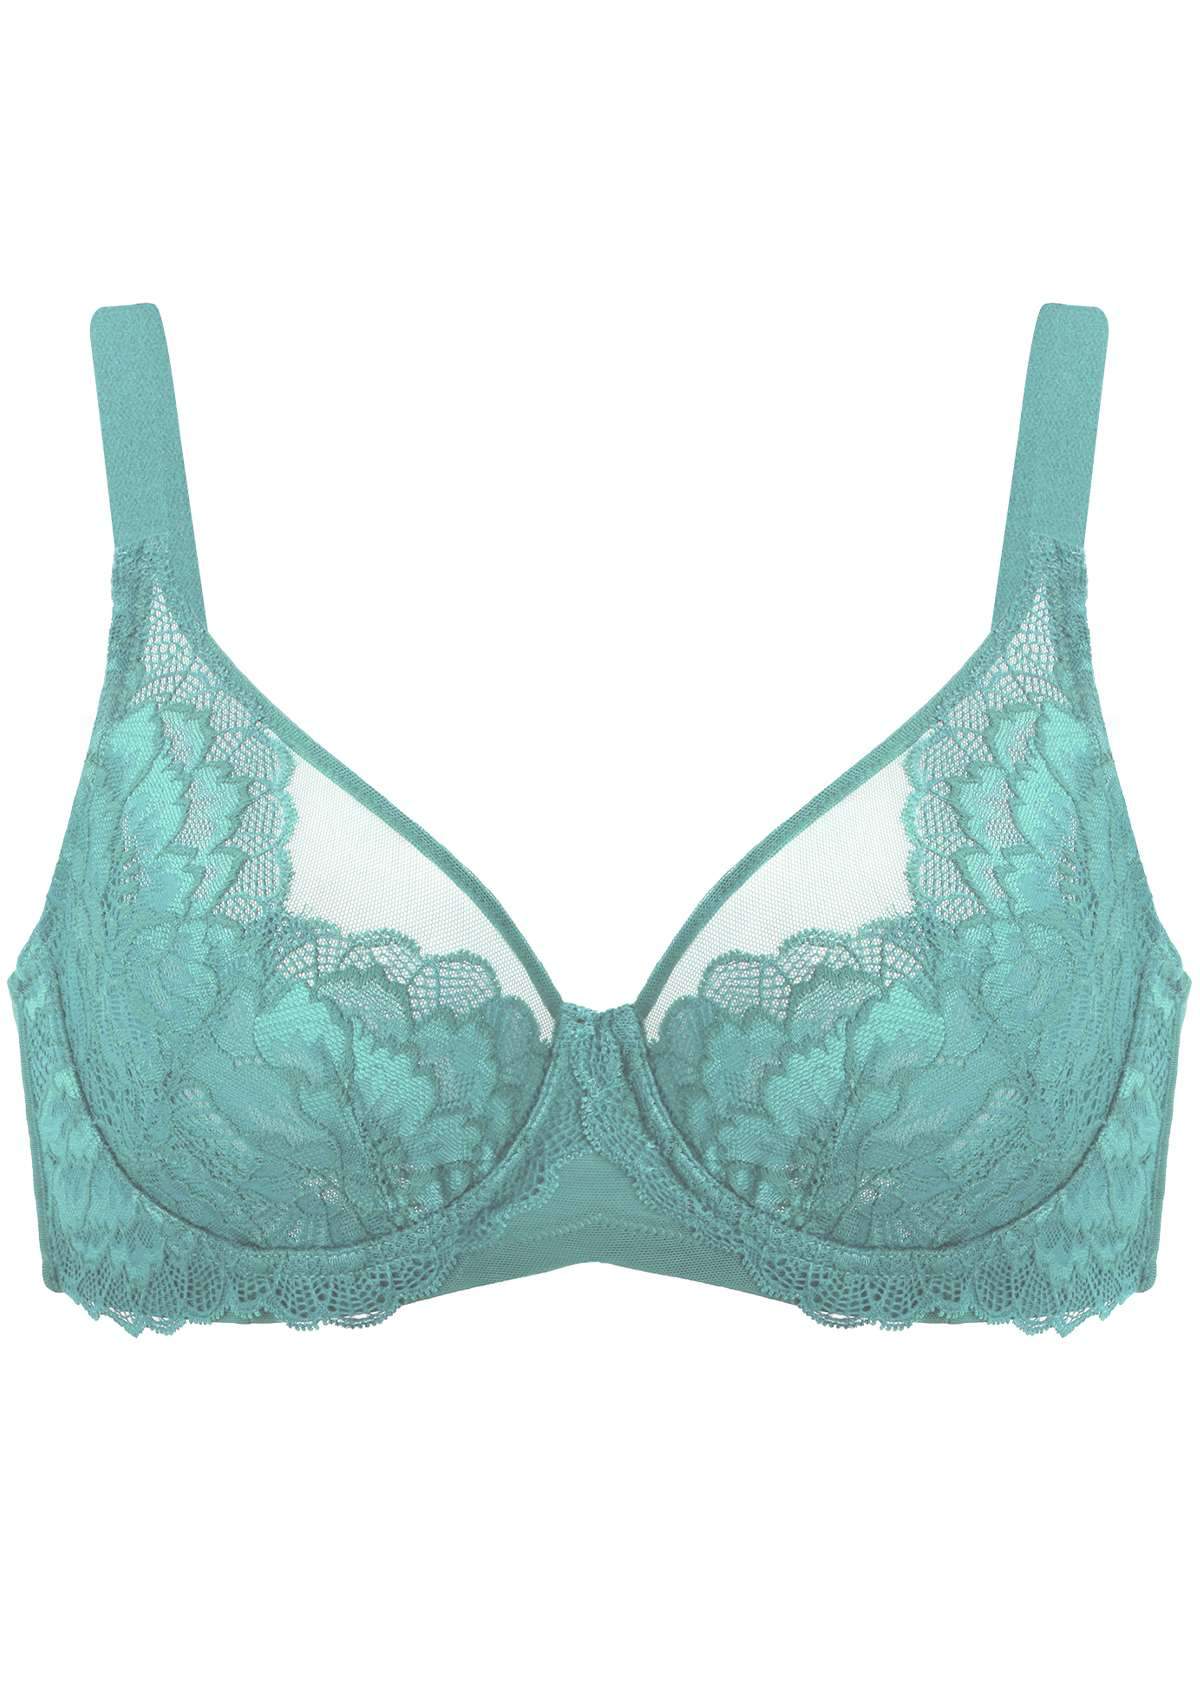 HSIA Paeonia Lace Full Coverage Underwire Non-Padded Uplifting Bra - Teal / 34 / D